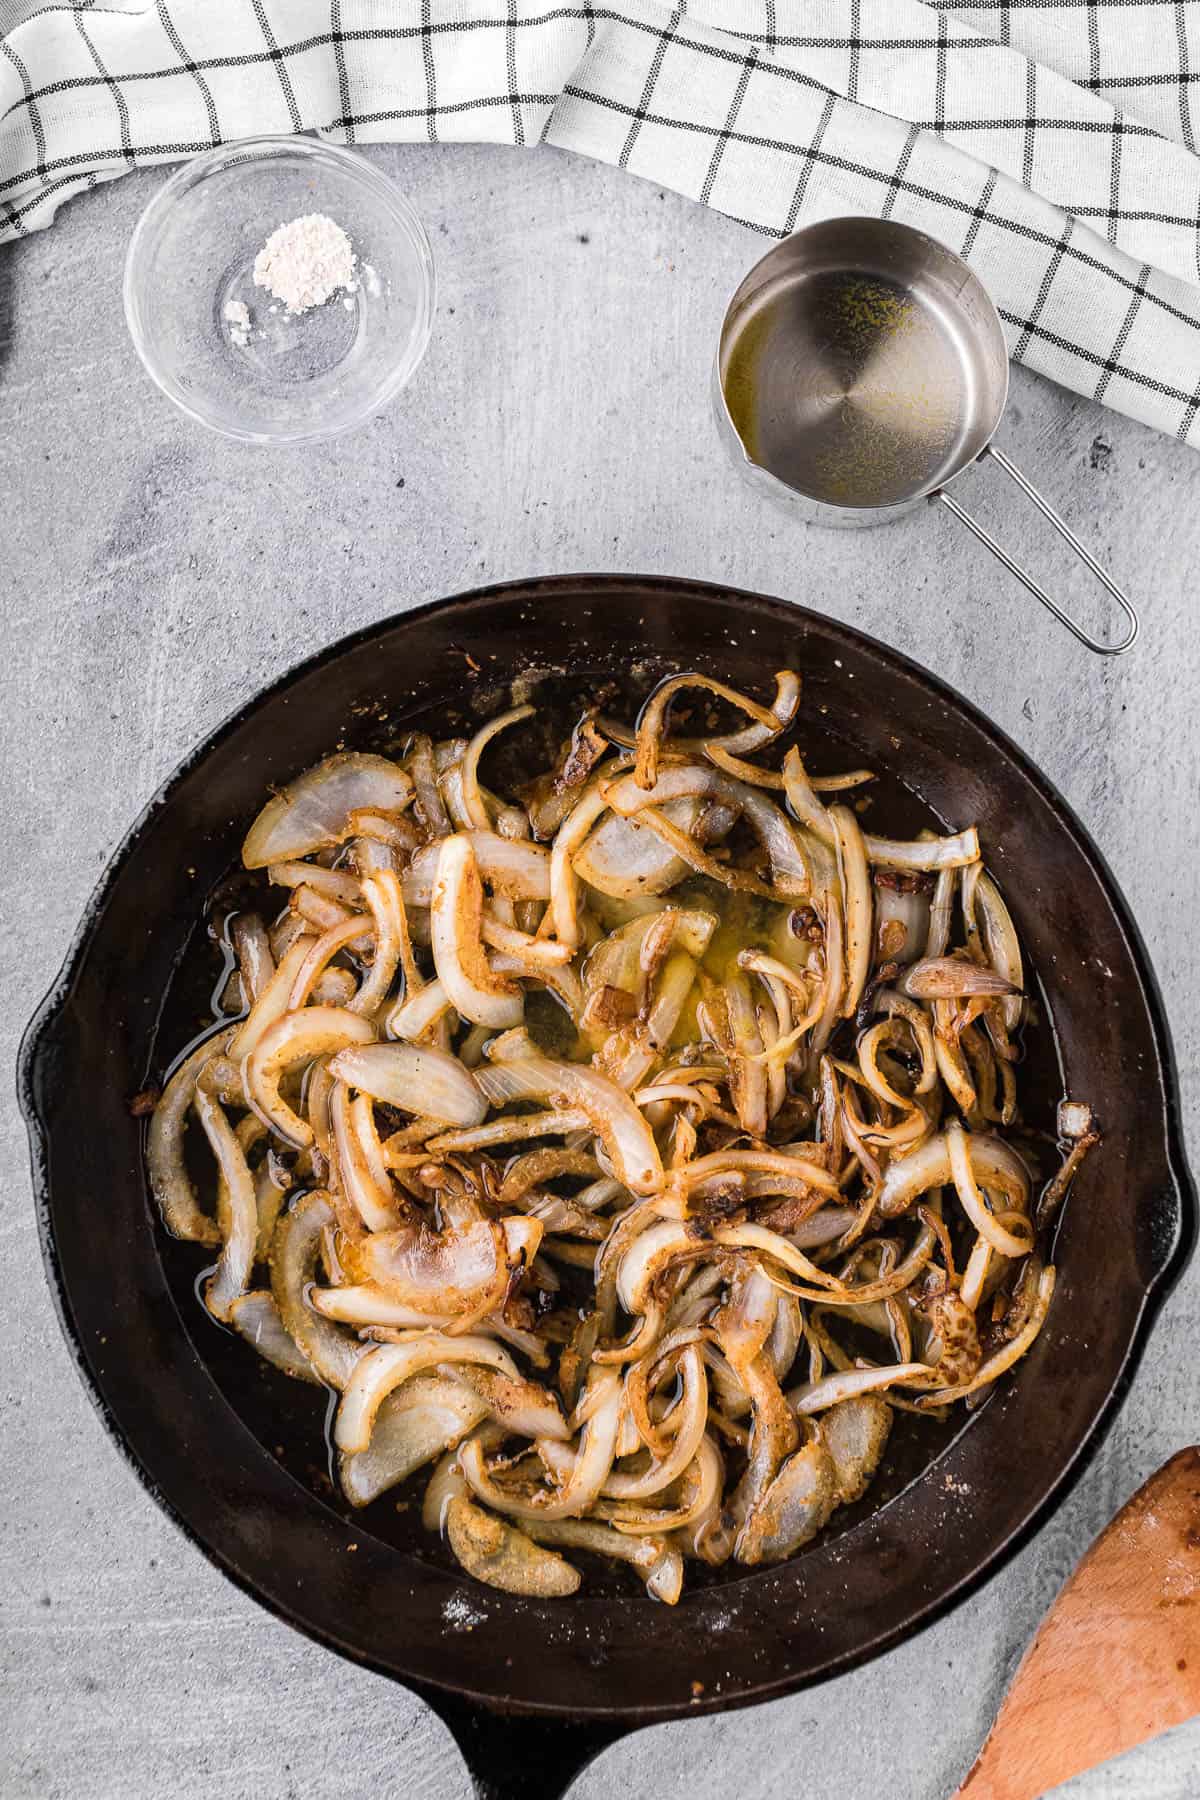 sauteed onions with chicken broth.